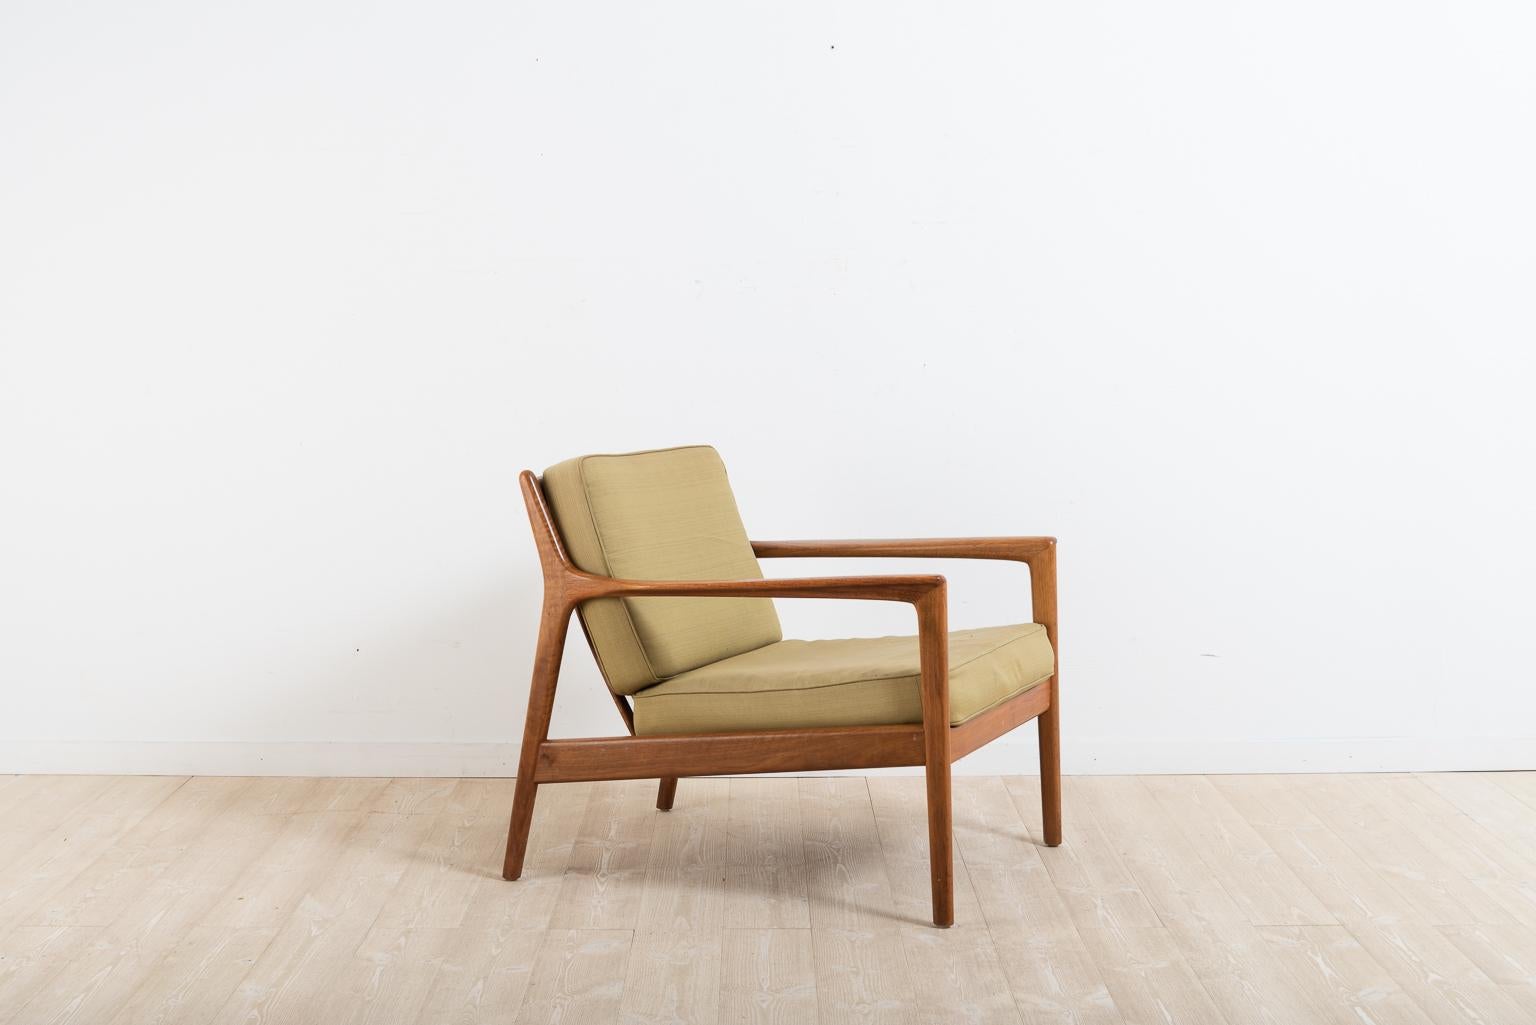 USA-75 armchair designed by Folke Ohlsson for DUX. The frame is manufactured from solid teak and the wood is healthy. The cushions are the original along with the original fabric and padding. We offer to renovate the cushions for the cost of 250 EUR